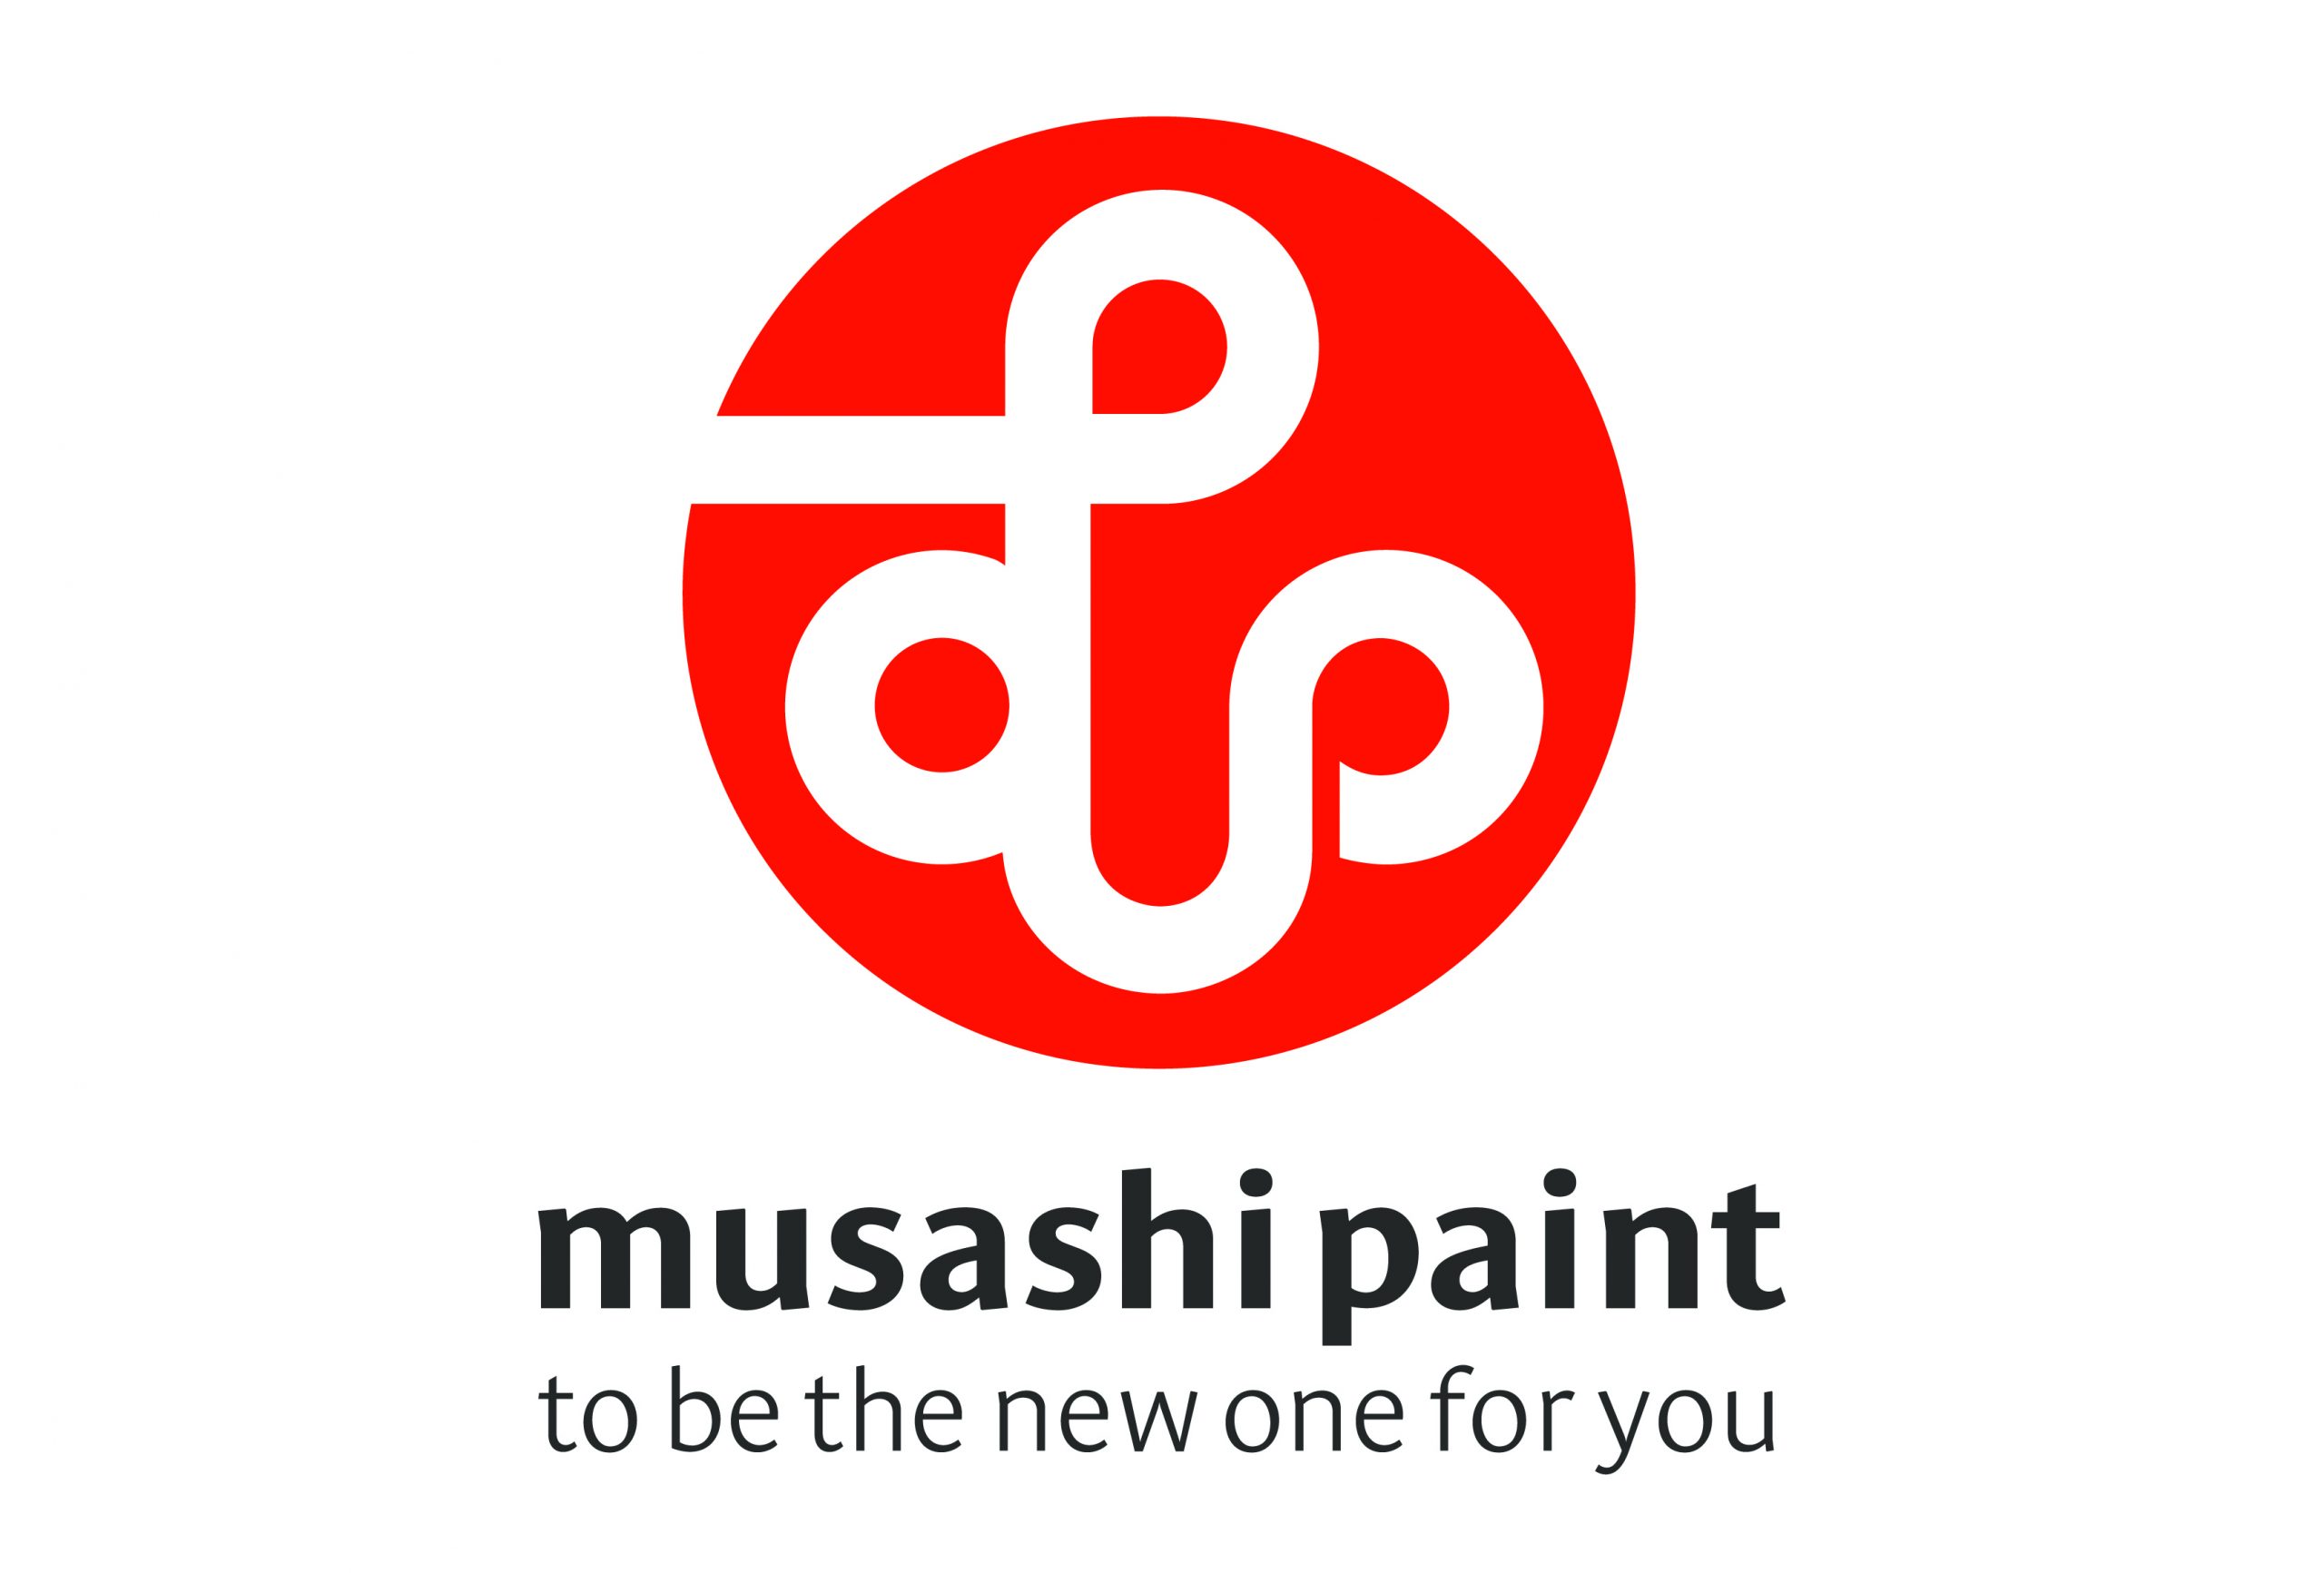 Musashi Paint Group to Launch a New Factory in Chonging (China) and Hanoi (Vietnam)